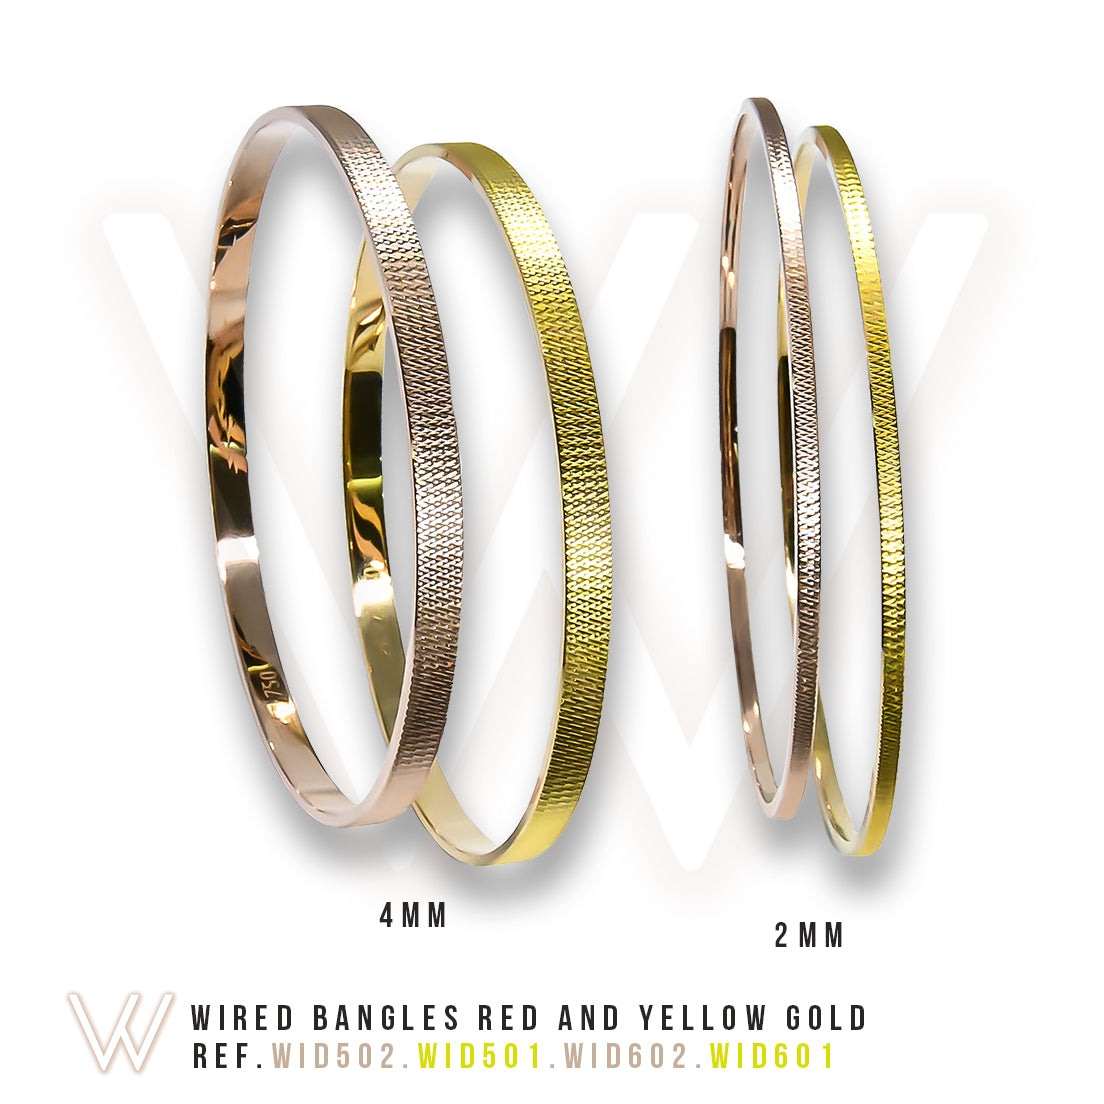 Bangle WIRED 4mm red gold 18k 750